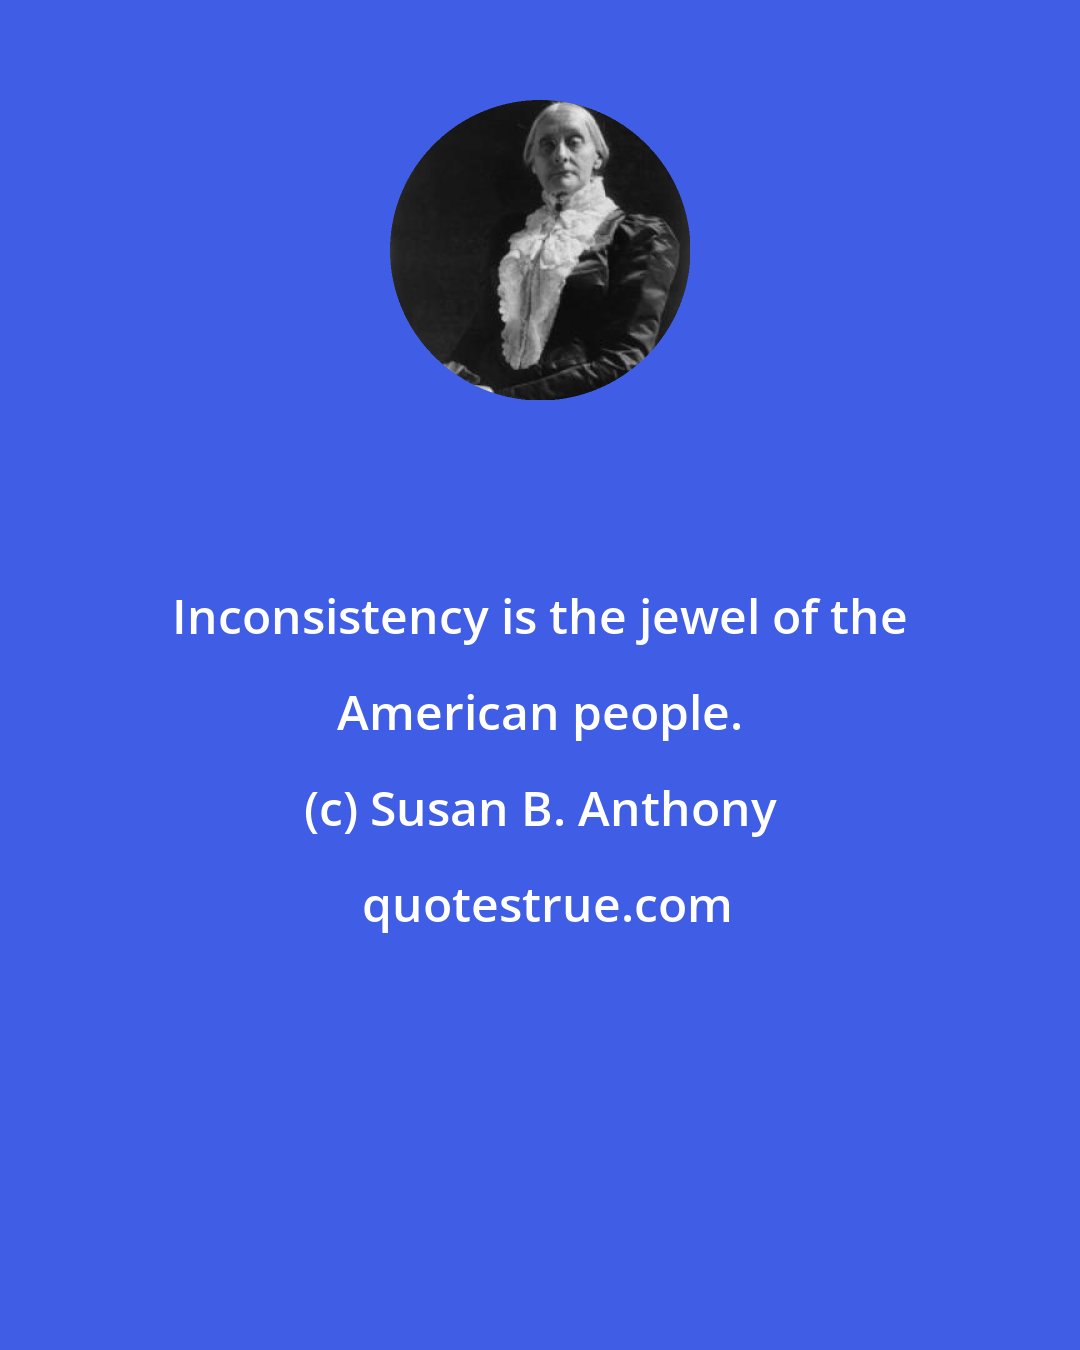 Susan B. Anthony: Inconsistency is the jewel of the American people.